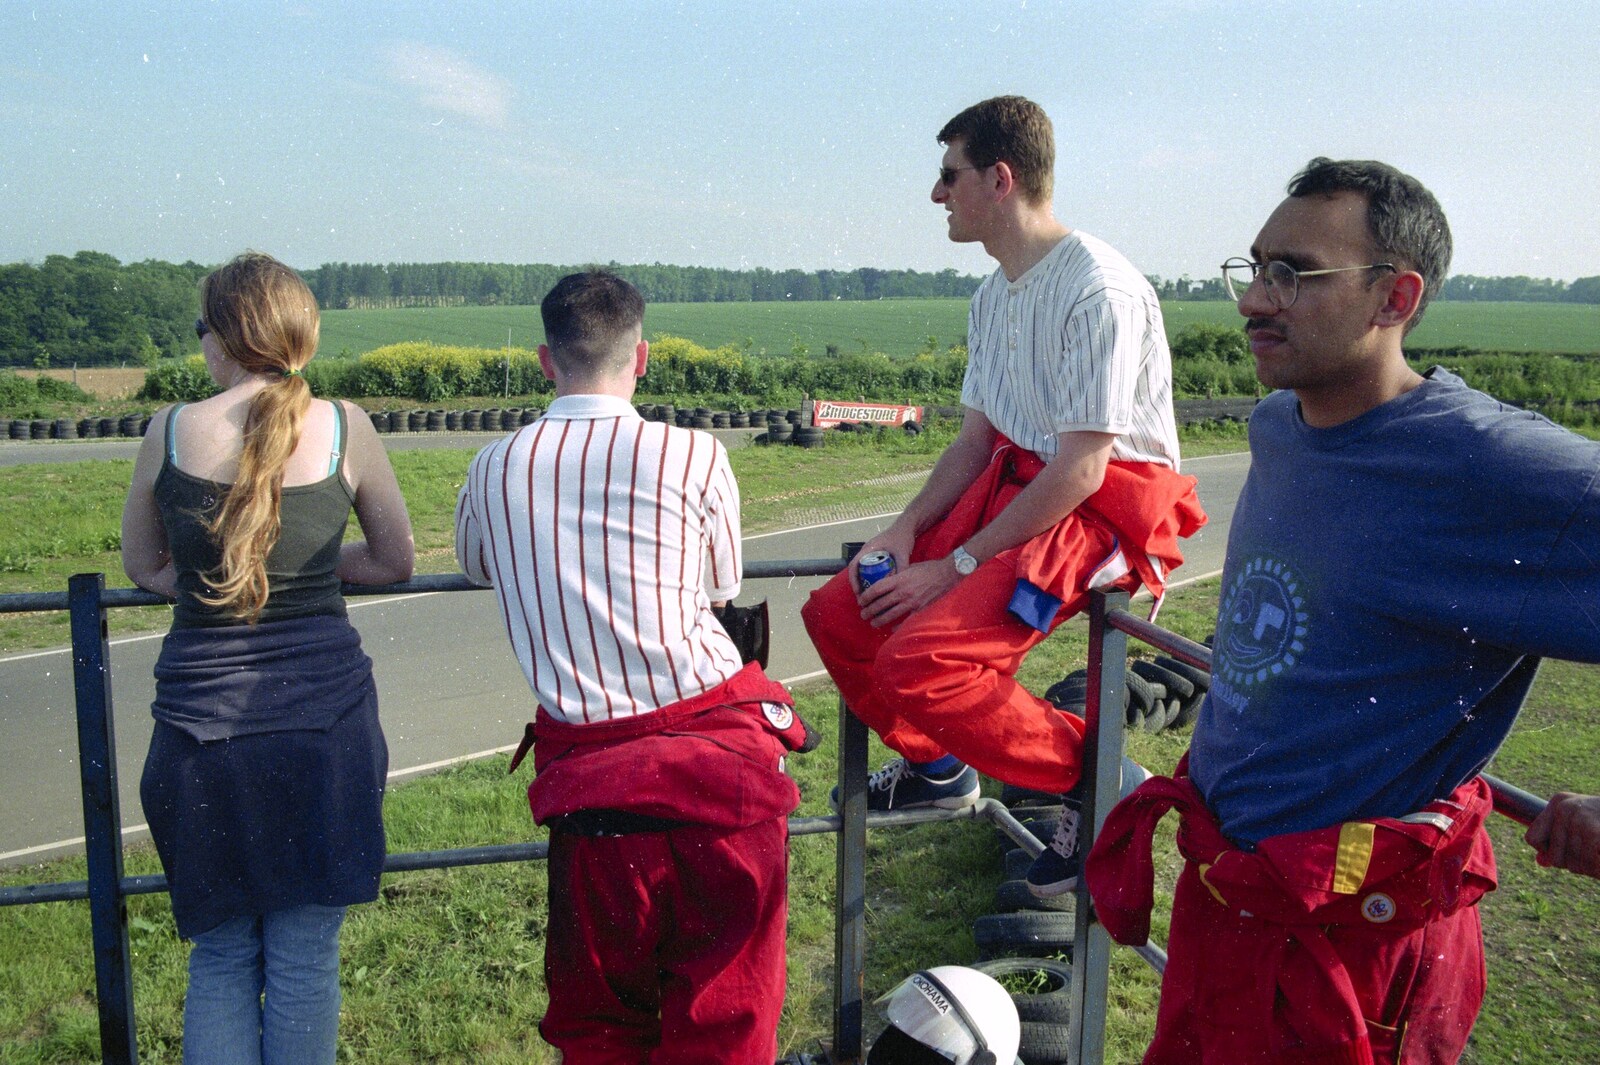 Jon and Raj wait for the races to start from Hamish's Wine and CISU Go-Karting, Caxton, Cambridge - 23rd June 1998